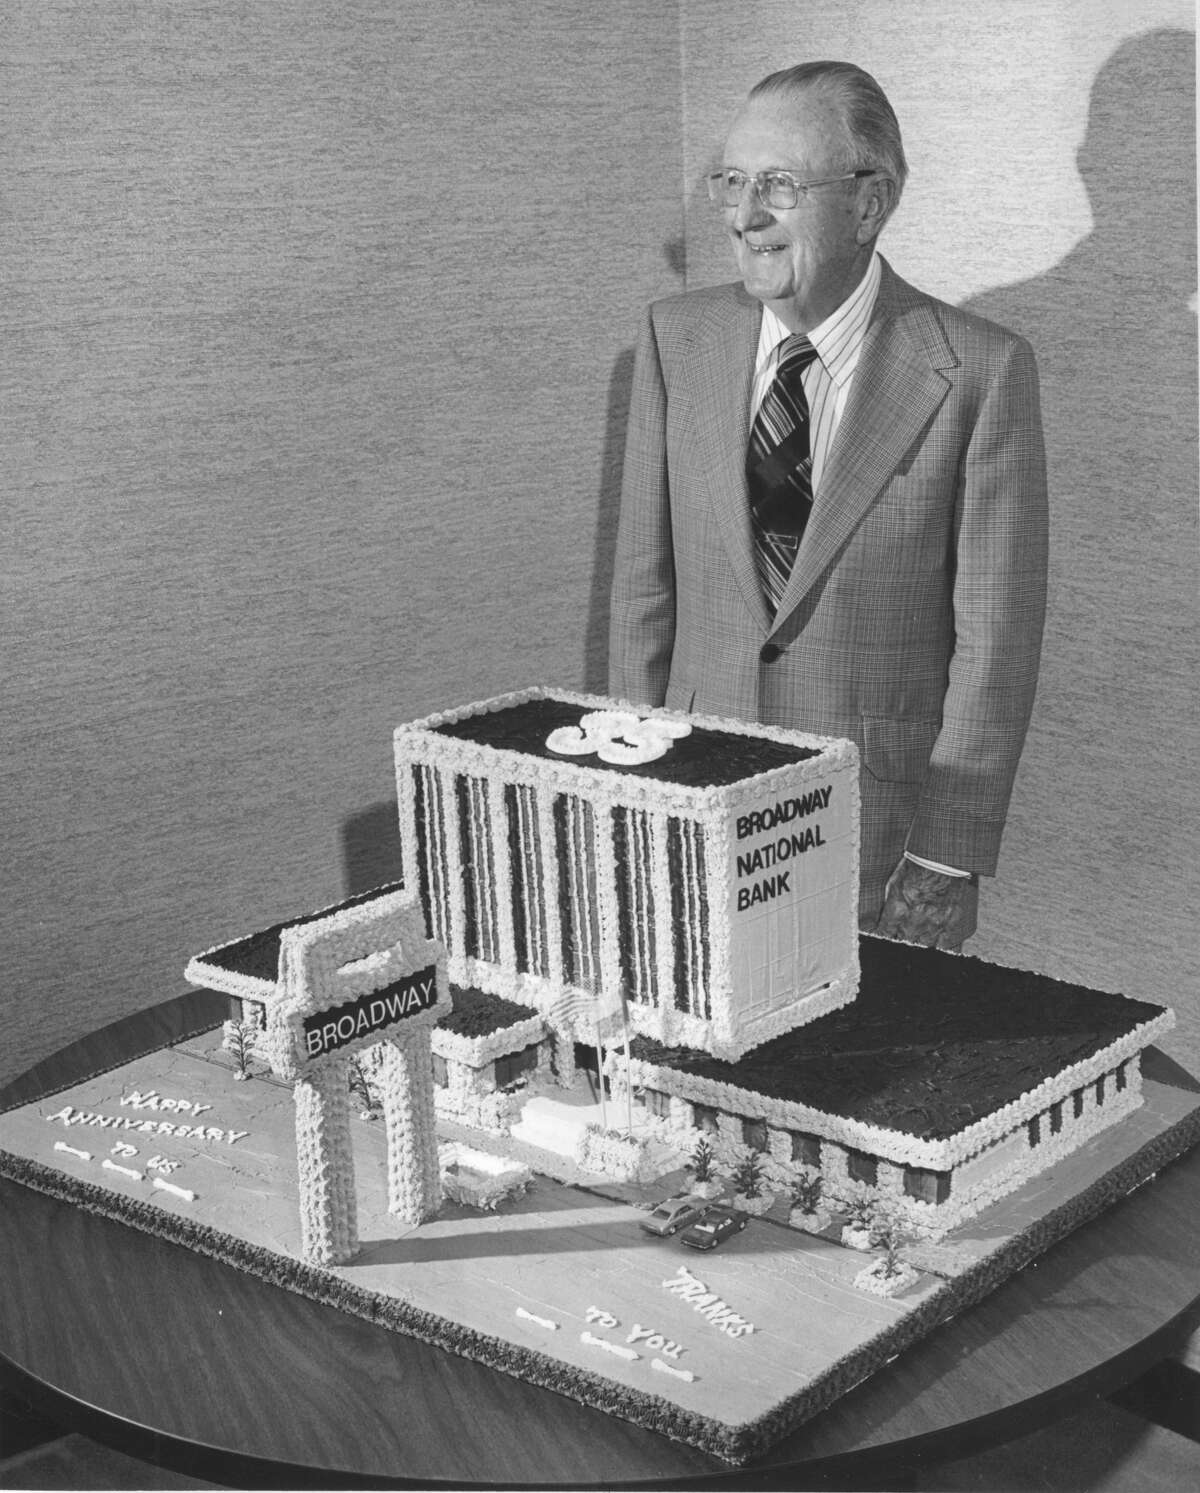 Col. C. E. Cheever poses near the bank-shaped cake for the Broadway National Bank's 35th anniversary in 1976.